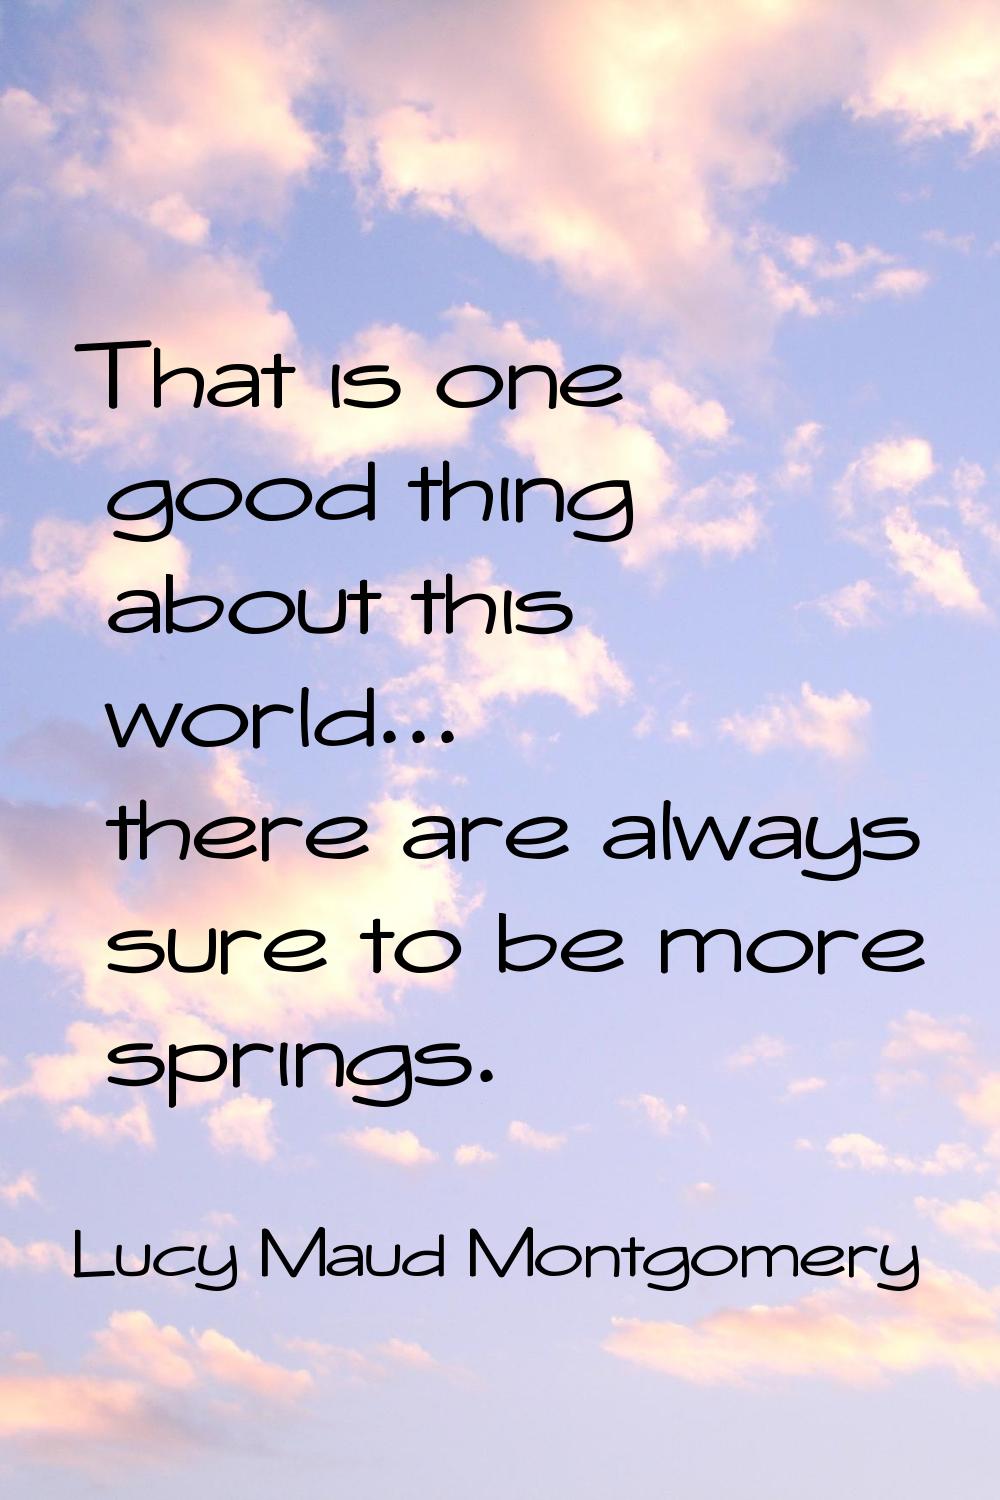 That is one good thing about this world... there are always sure to be more springs.